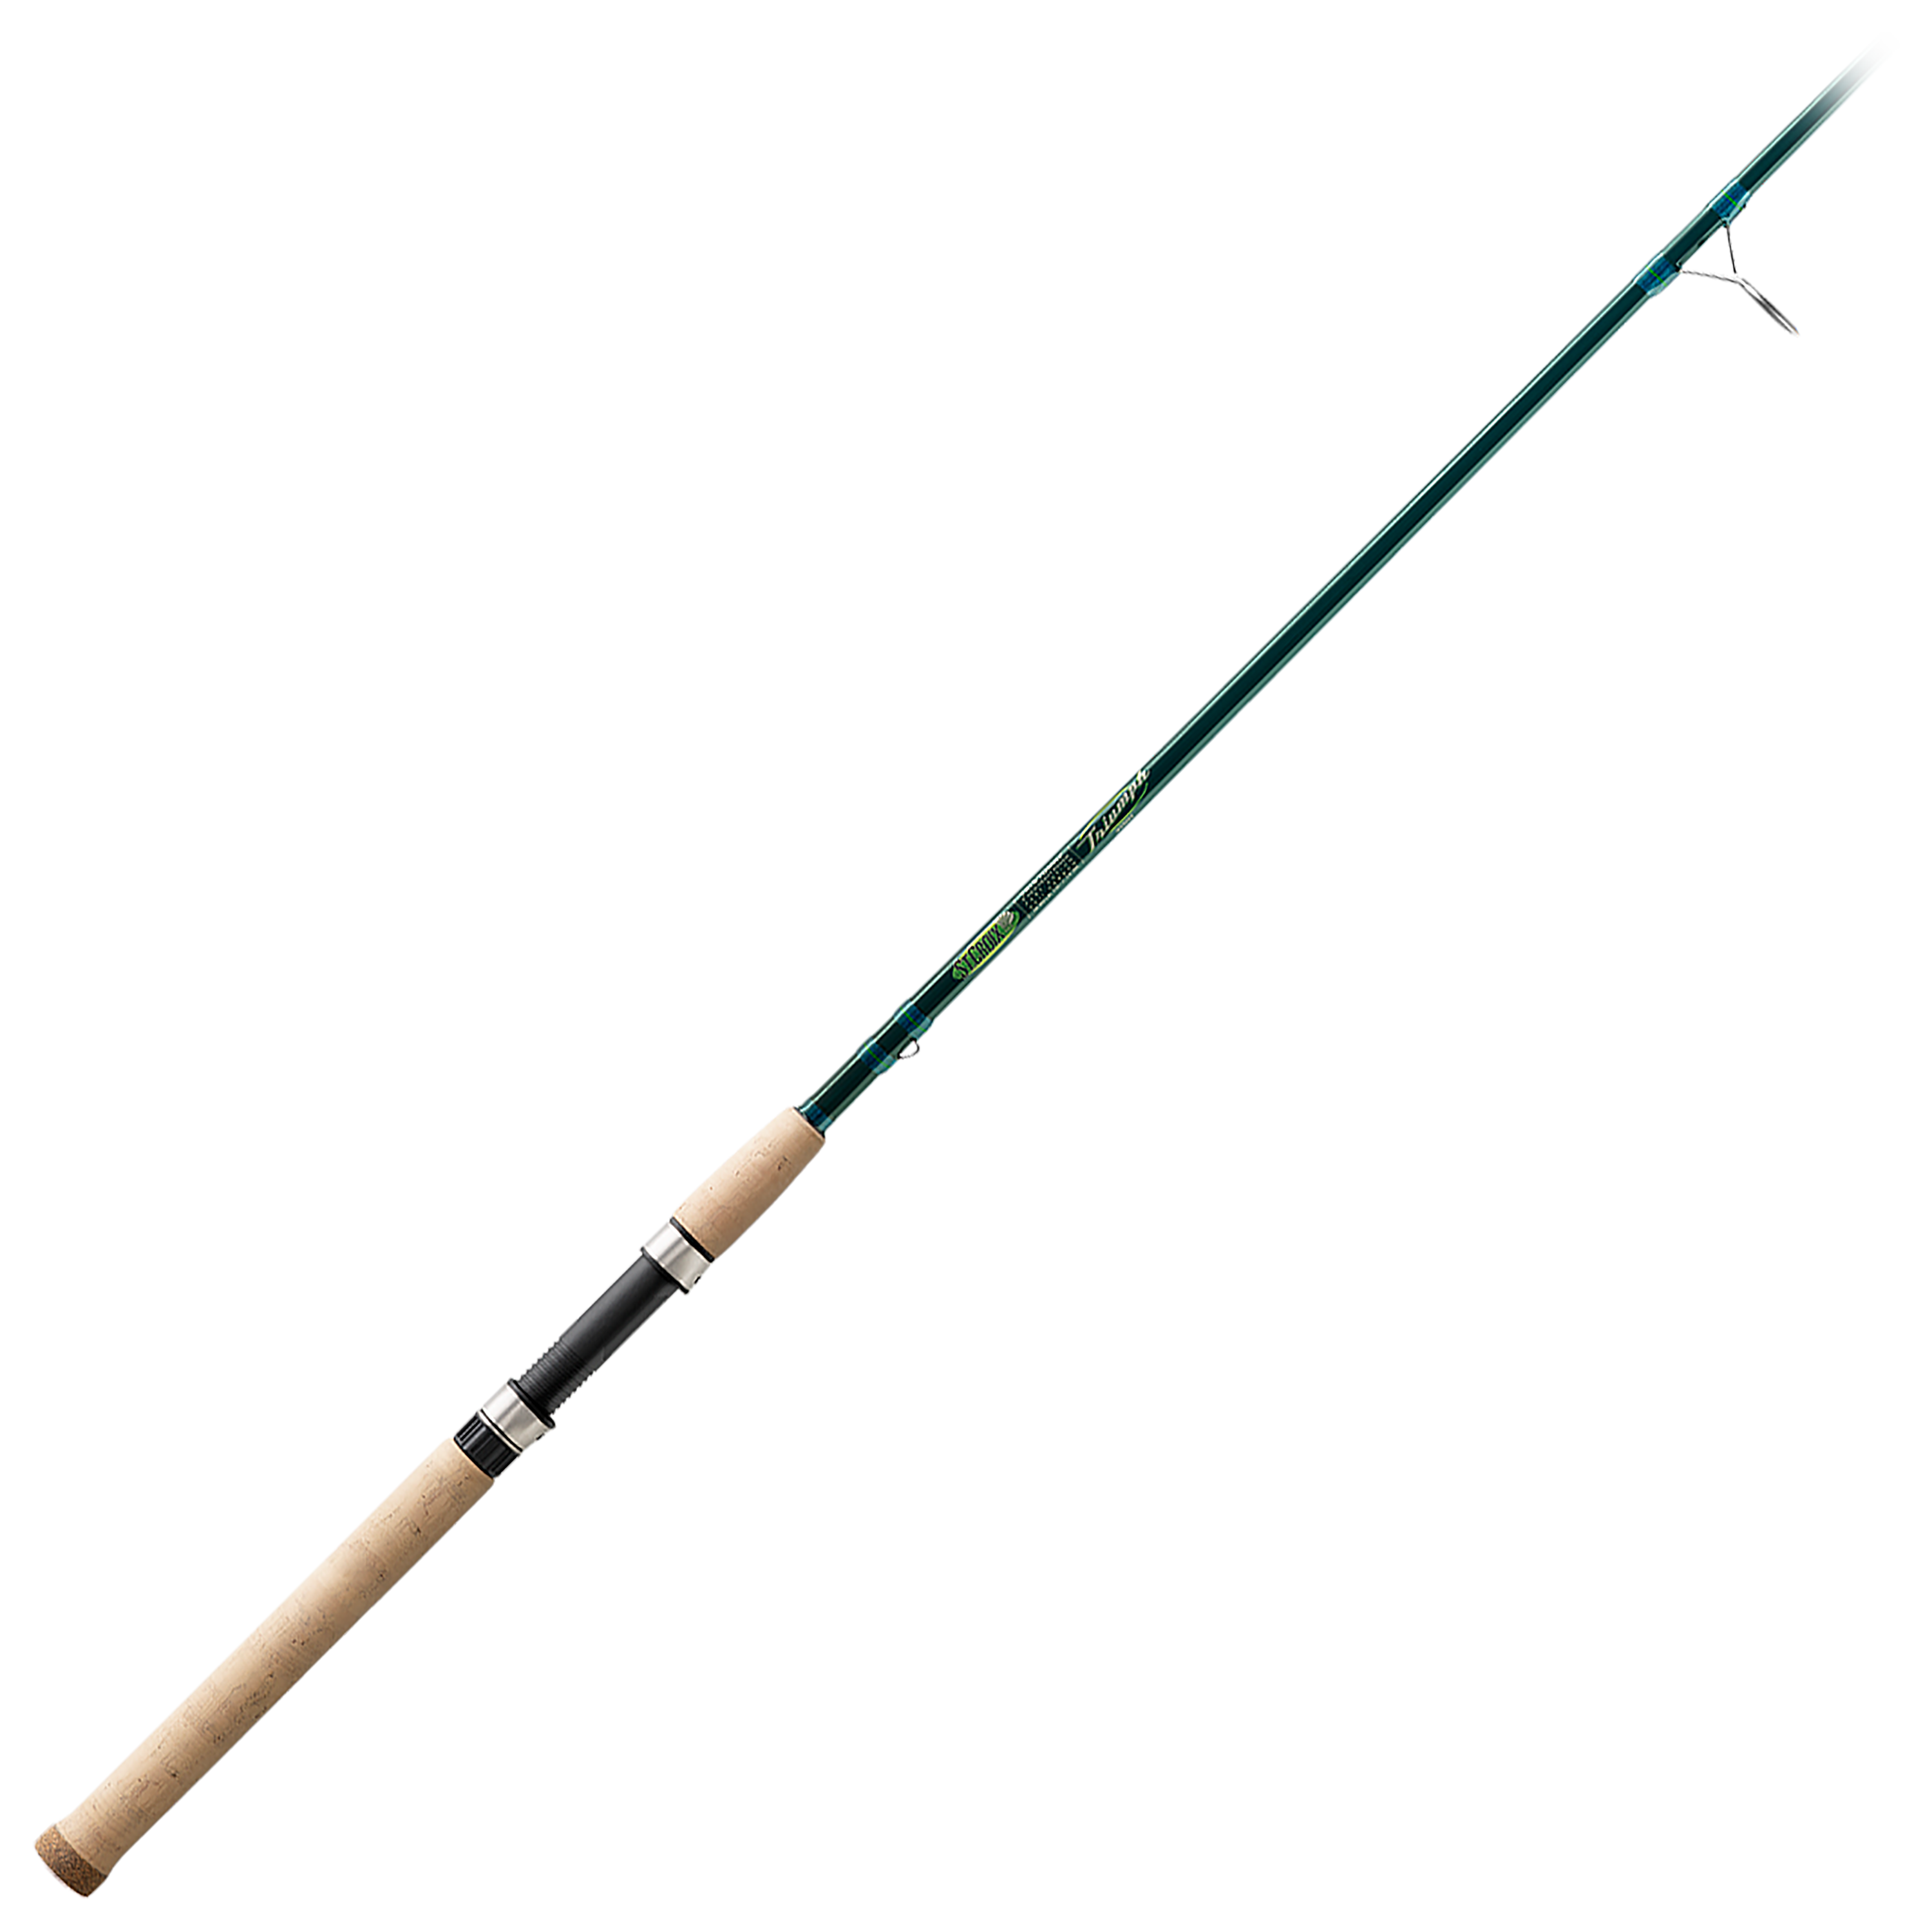 St. Croix TRIS70MHF Triumph Inshore Spinning Rod